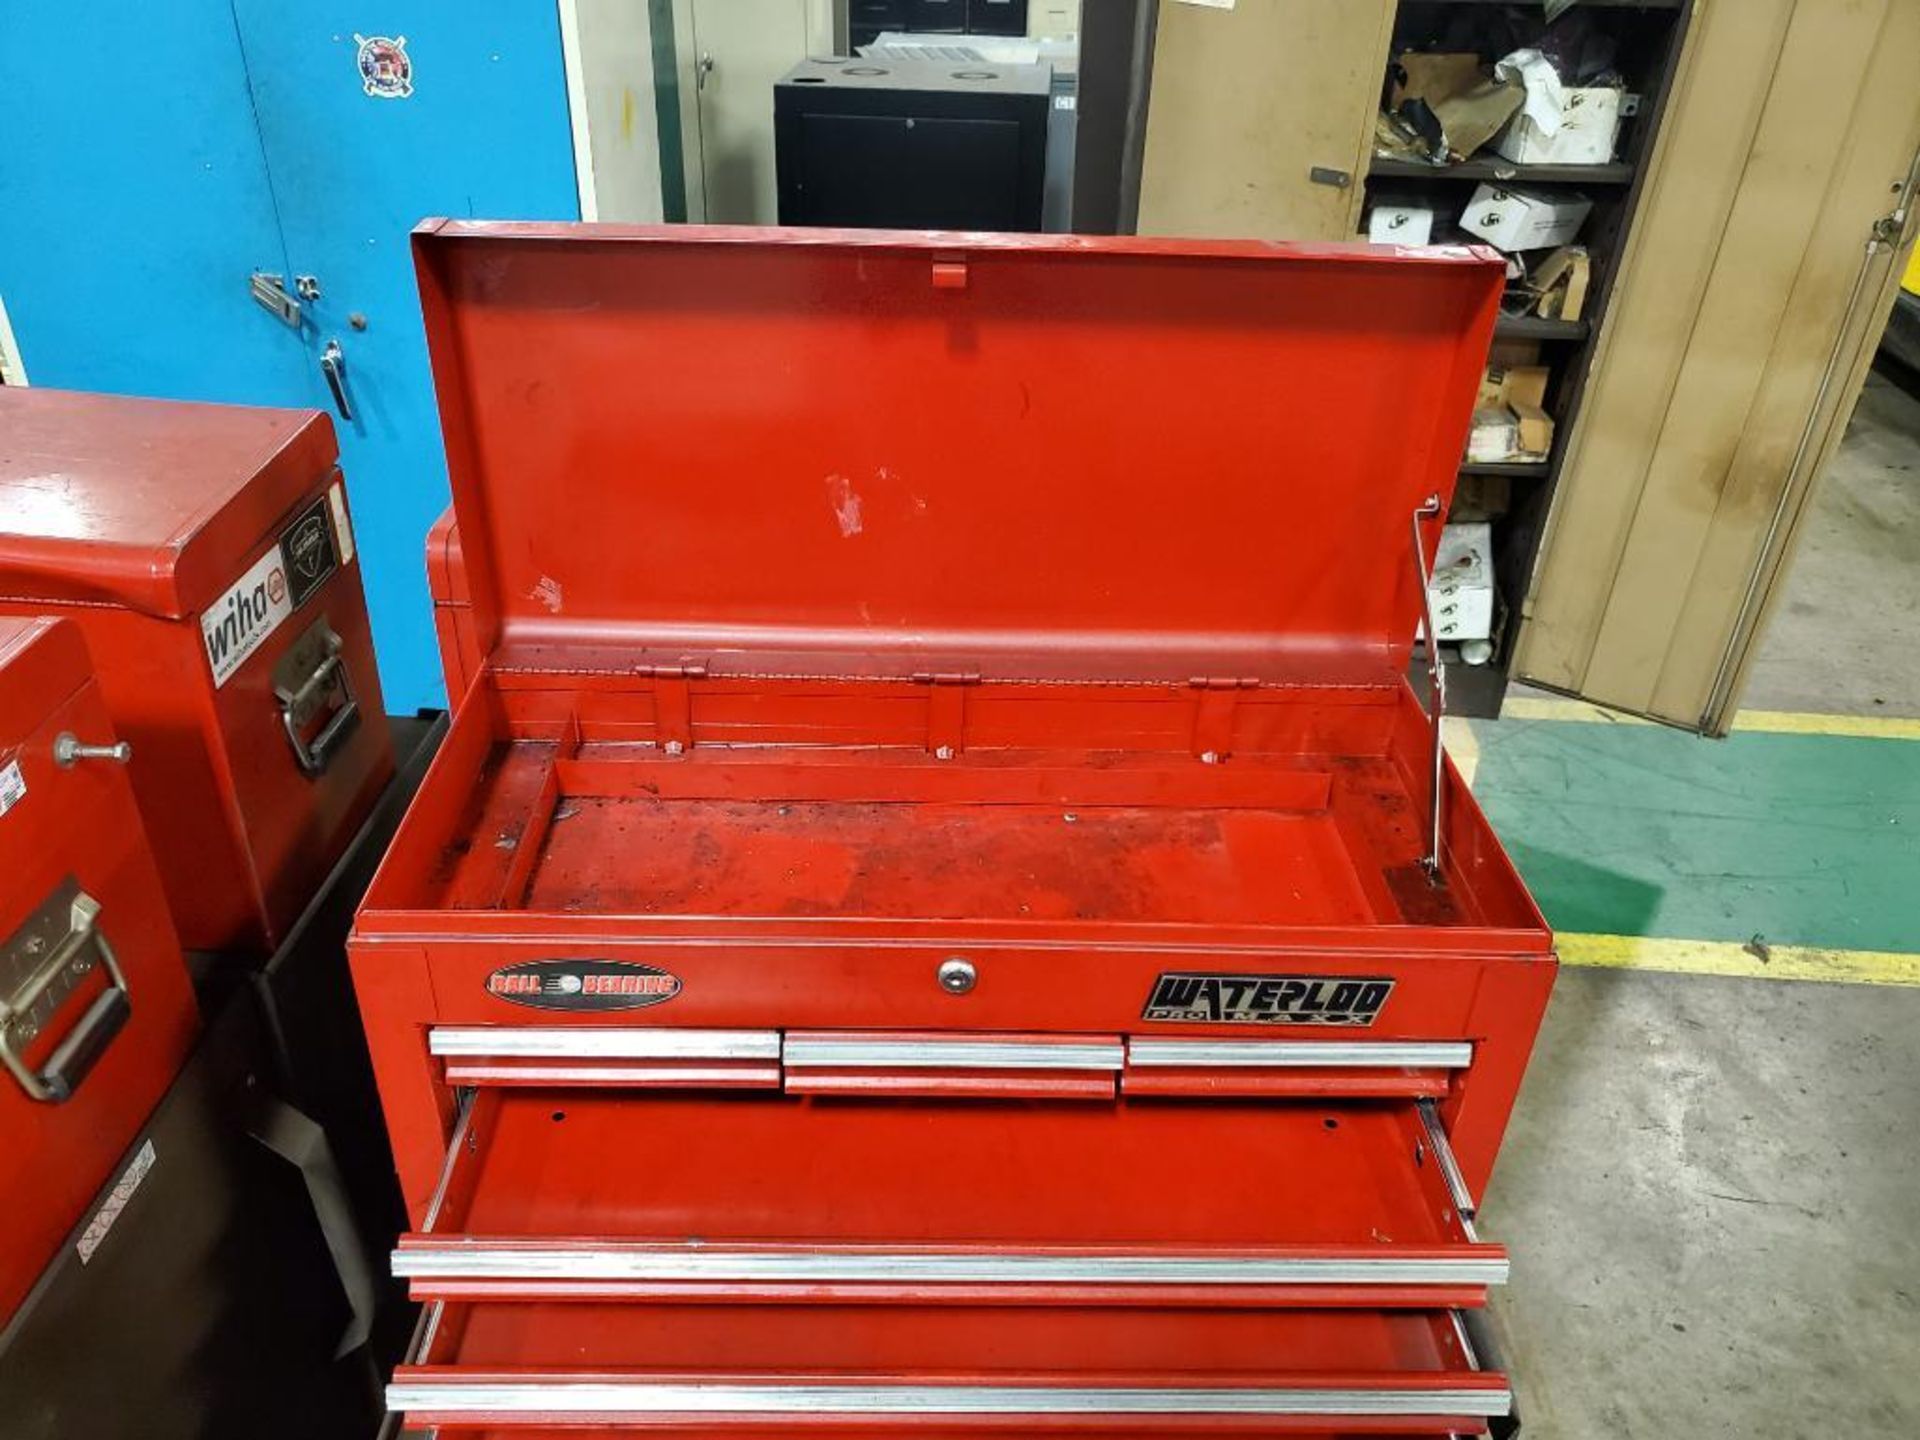 Qty 4 - Assorted tool boxes. Waterloo. 26x12x16, 27x18x41 WxDxH. - Image 3 of 7